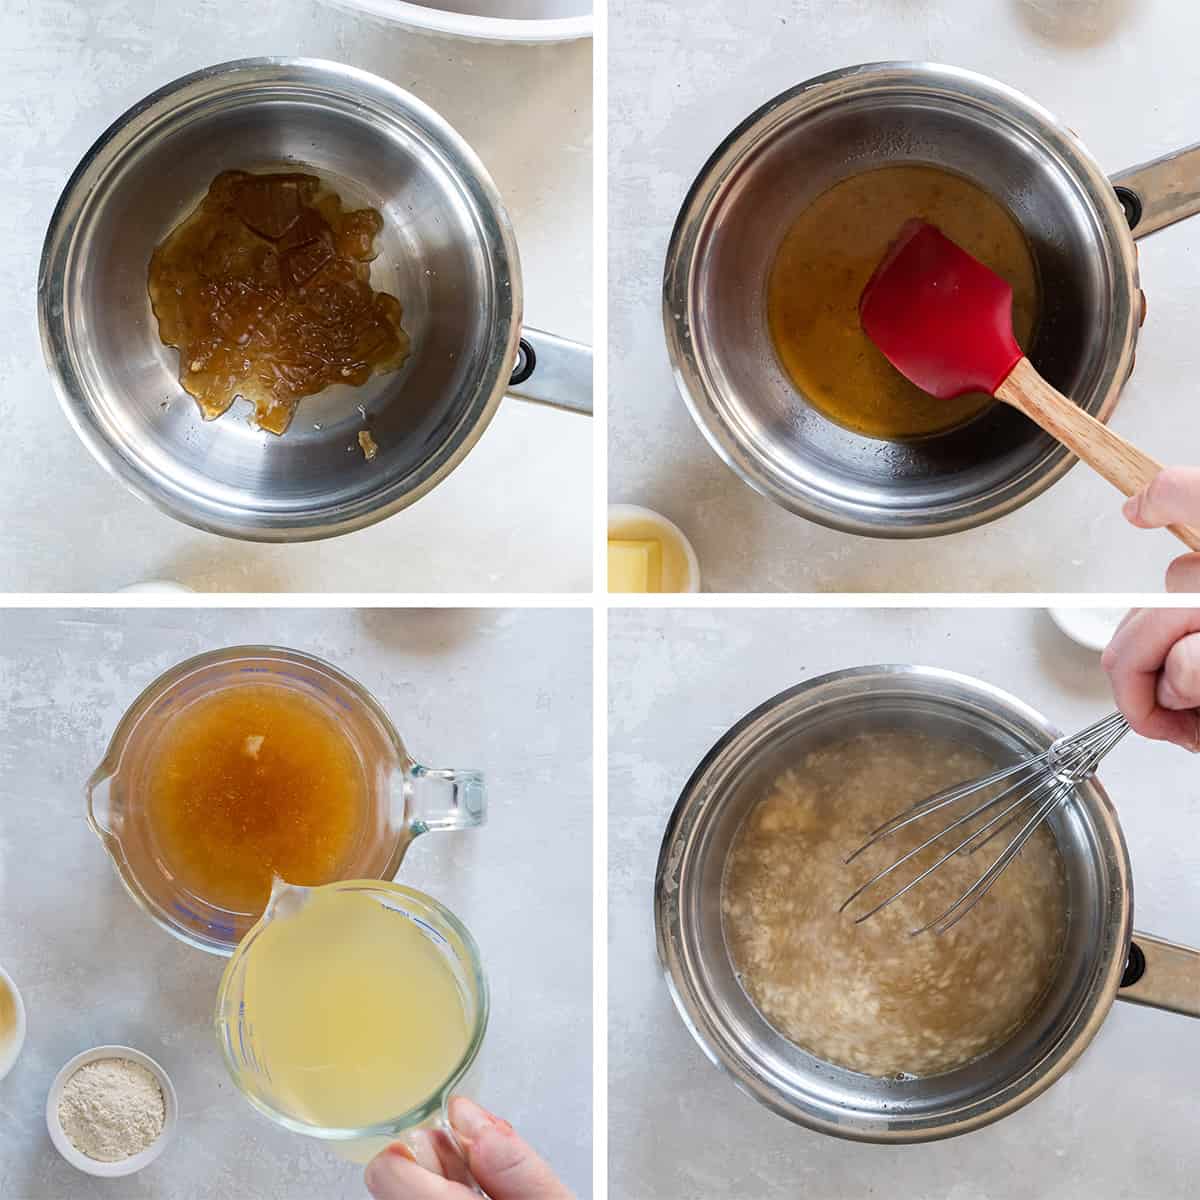 Four images of chicken drippings, broth, and a butter flour mixture being combined in a saucepan to make gravy.